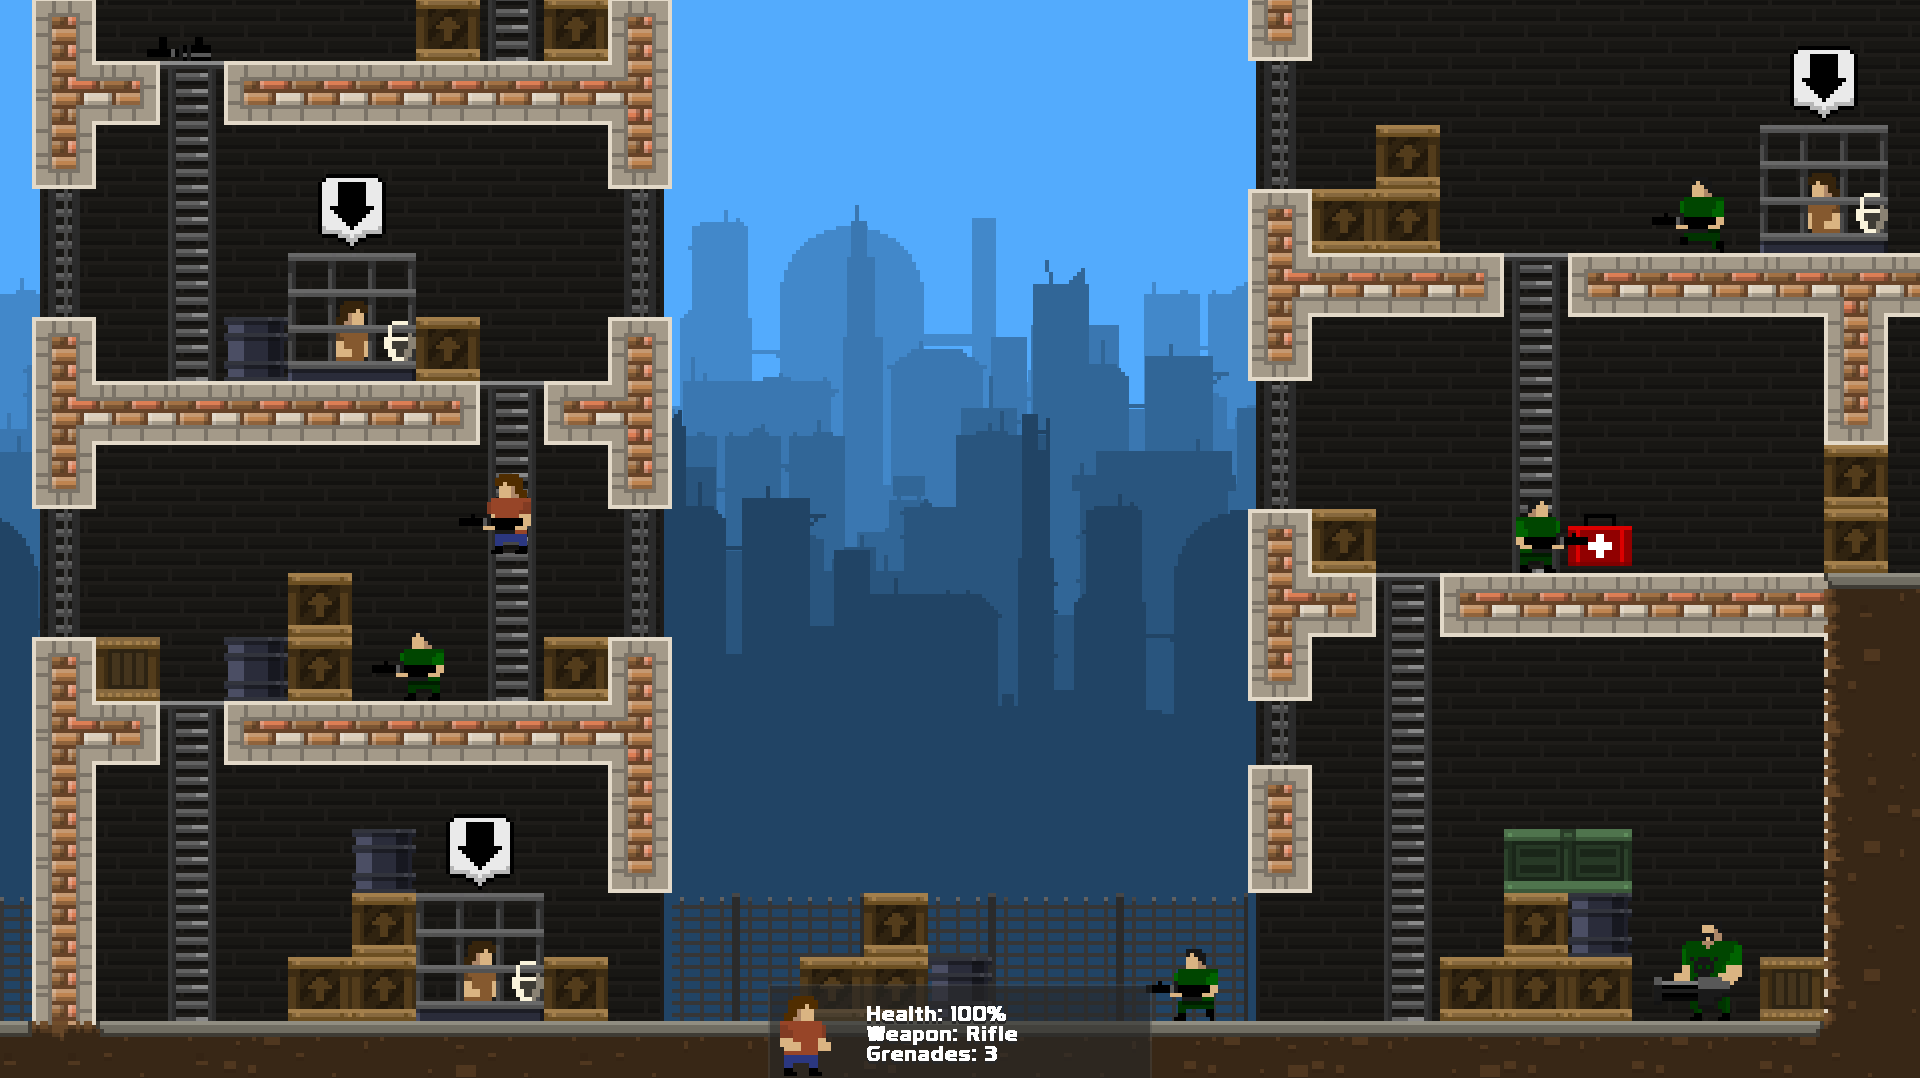 The current iteration of a new prison level.